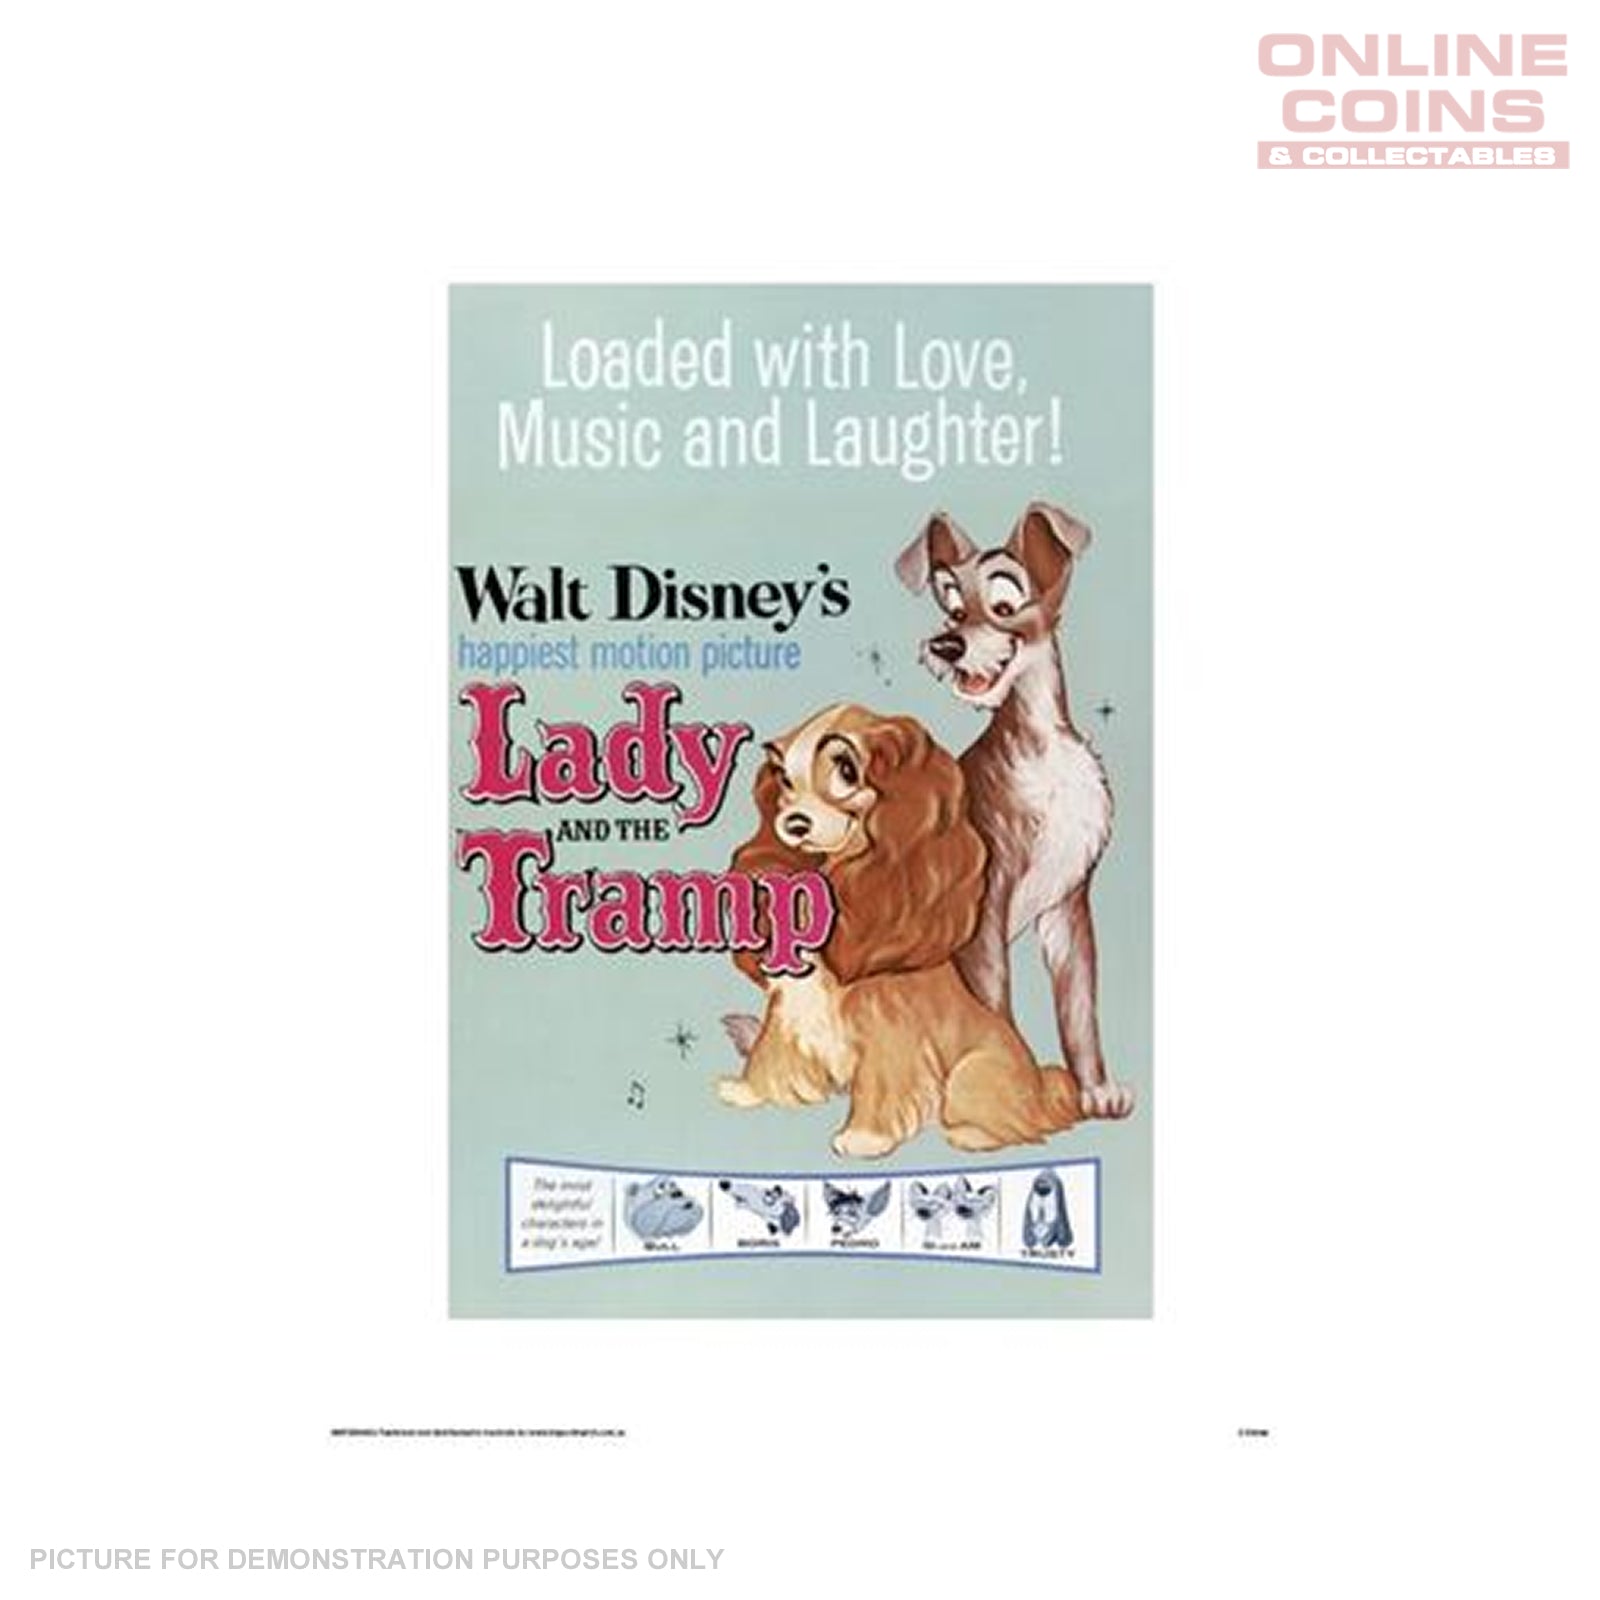 Disney Officially Licensed Art Print - Lady And The Tramp Movie Poster